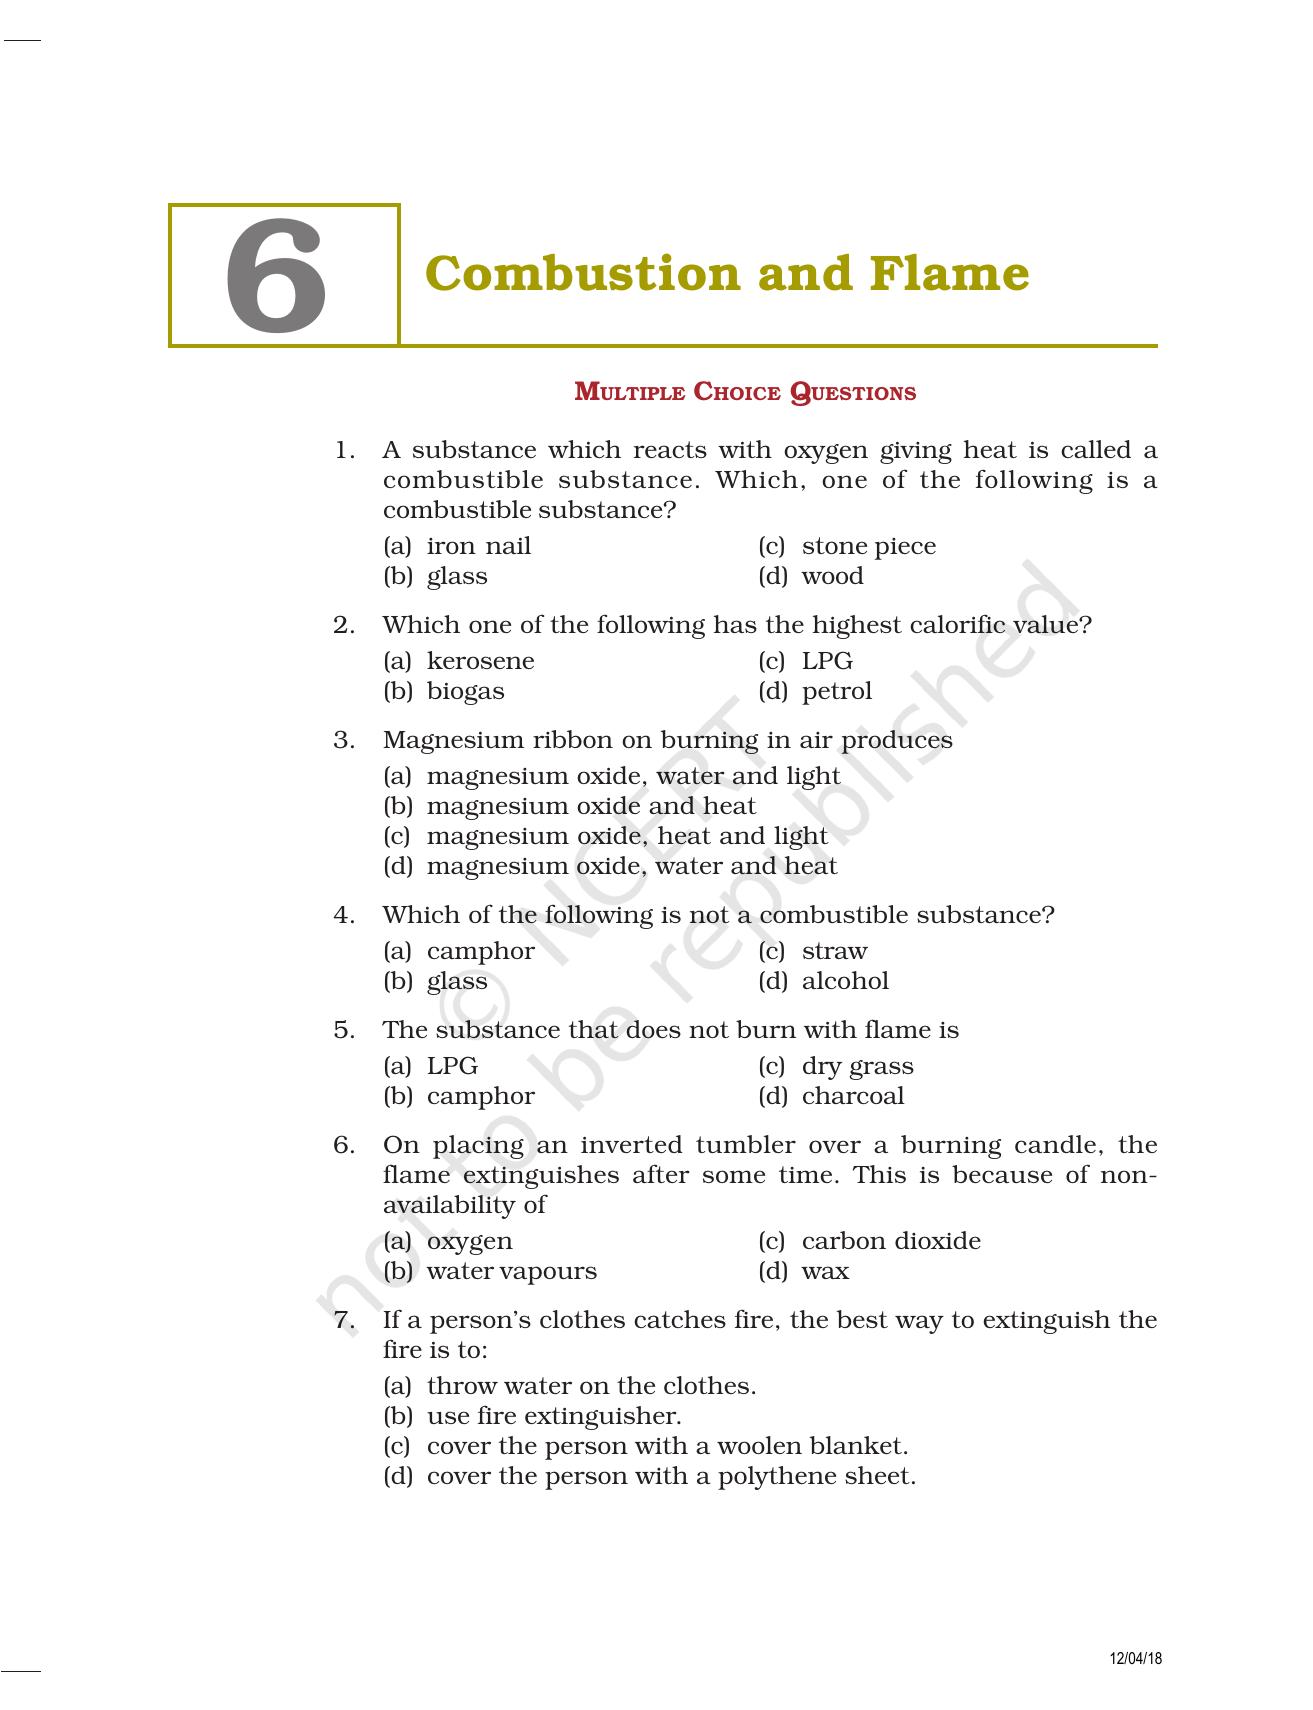 NCERT Exemplar Book for Class 8 Science: Chapter 6- Combustion and Flame - Page 1